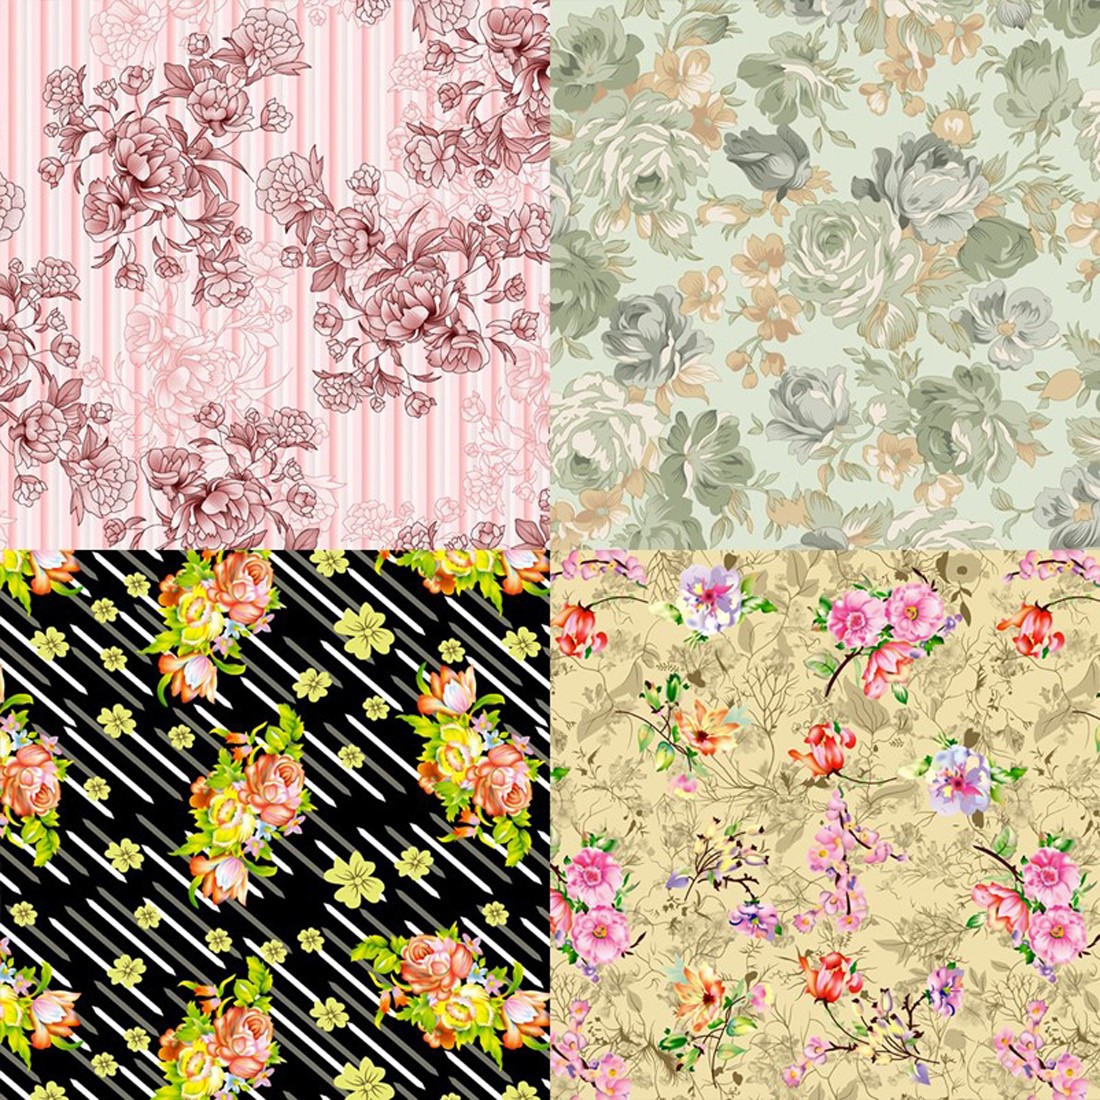 Floral Seamless Patterns for Textile Design preview image.